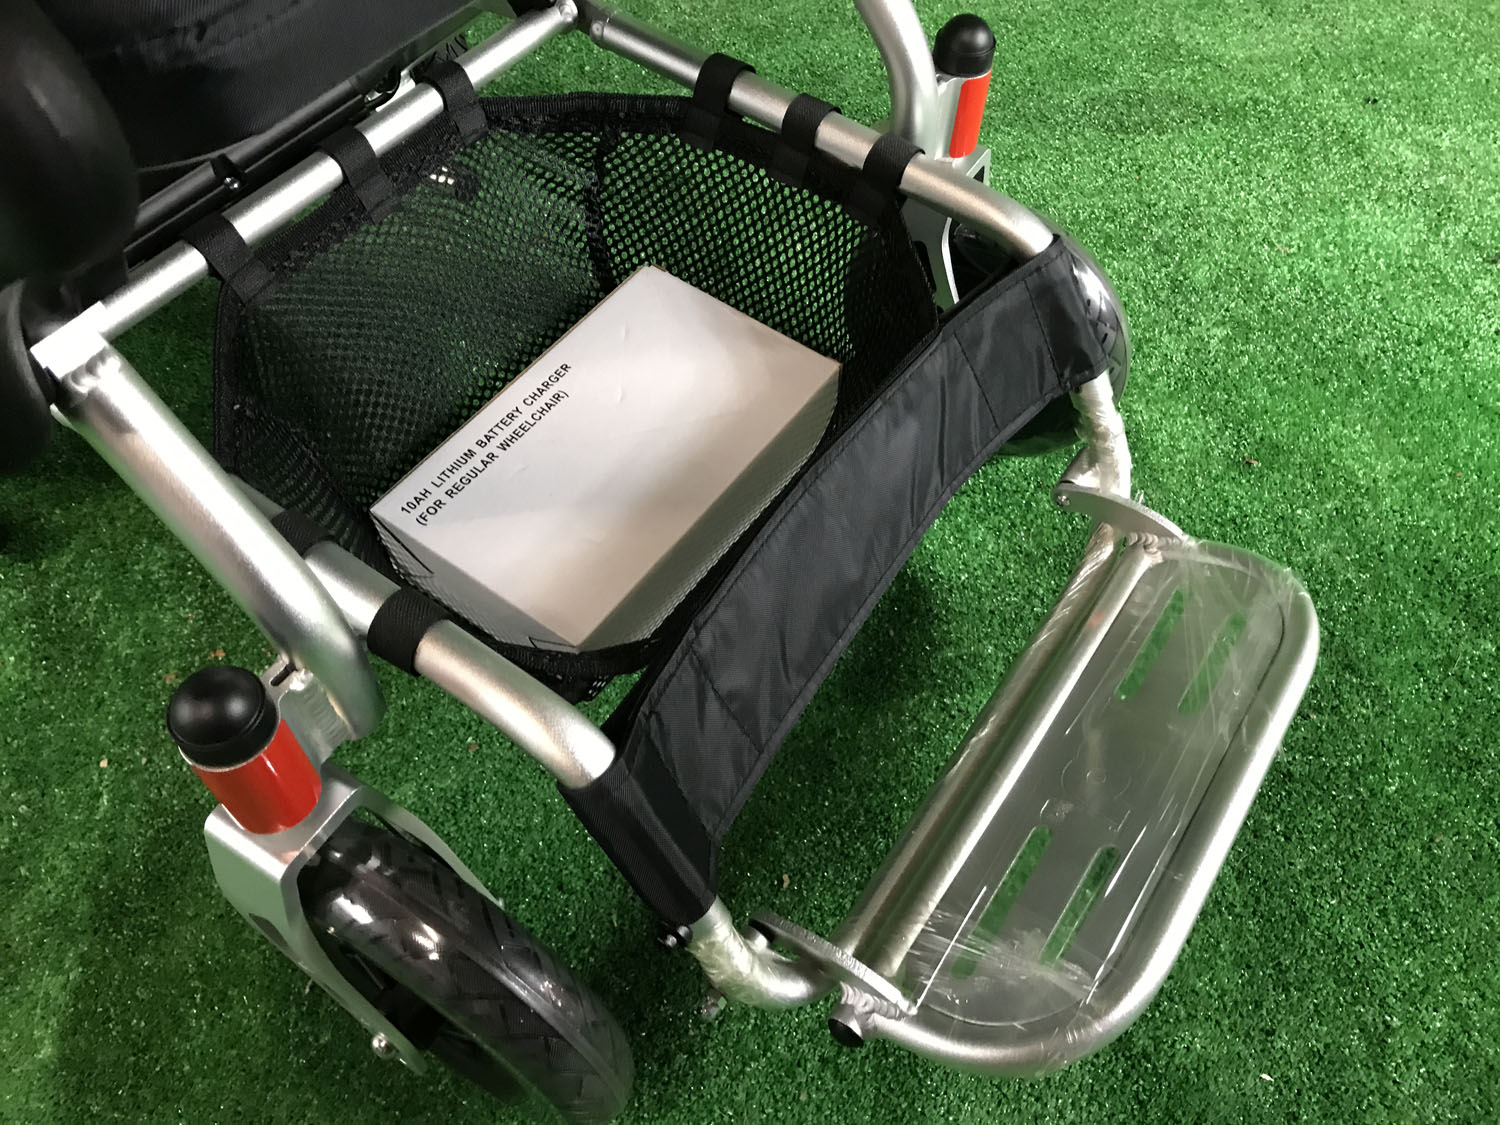 New Motion Healthcare Foldalite Folding Light Weight Powerchair - Electric Wheelchair